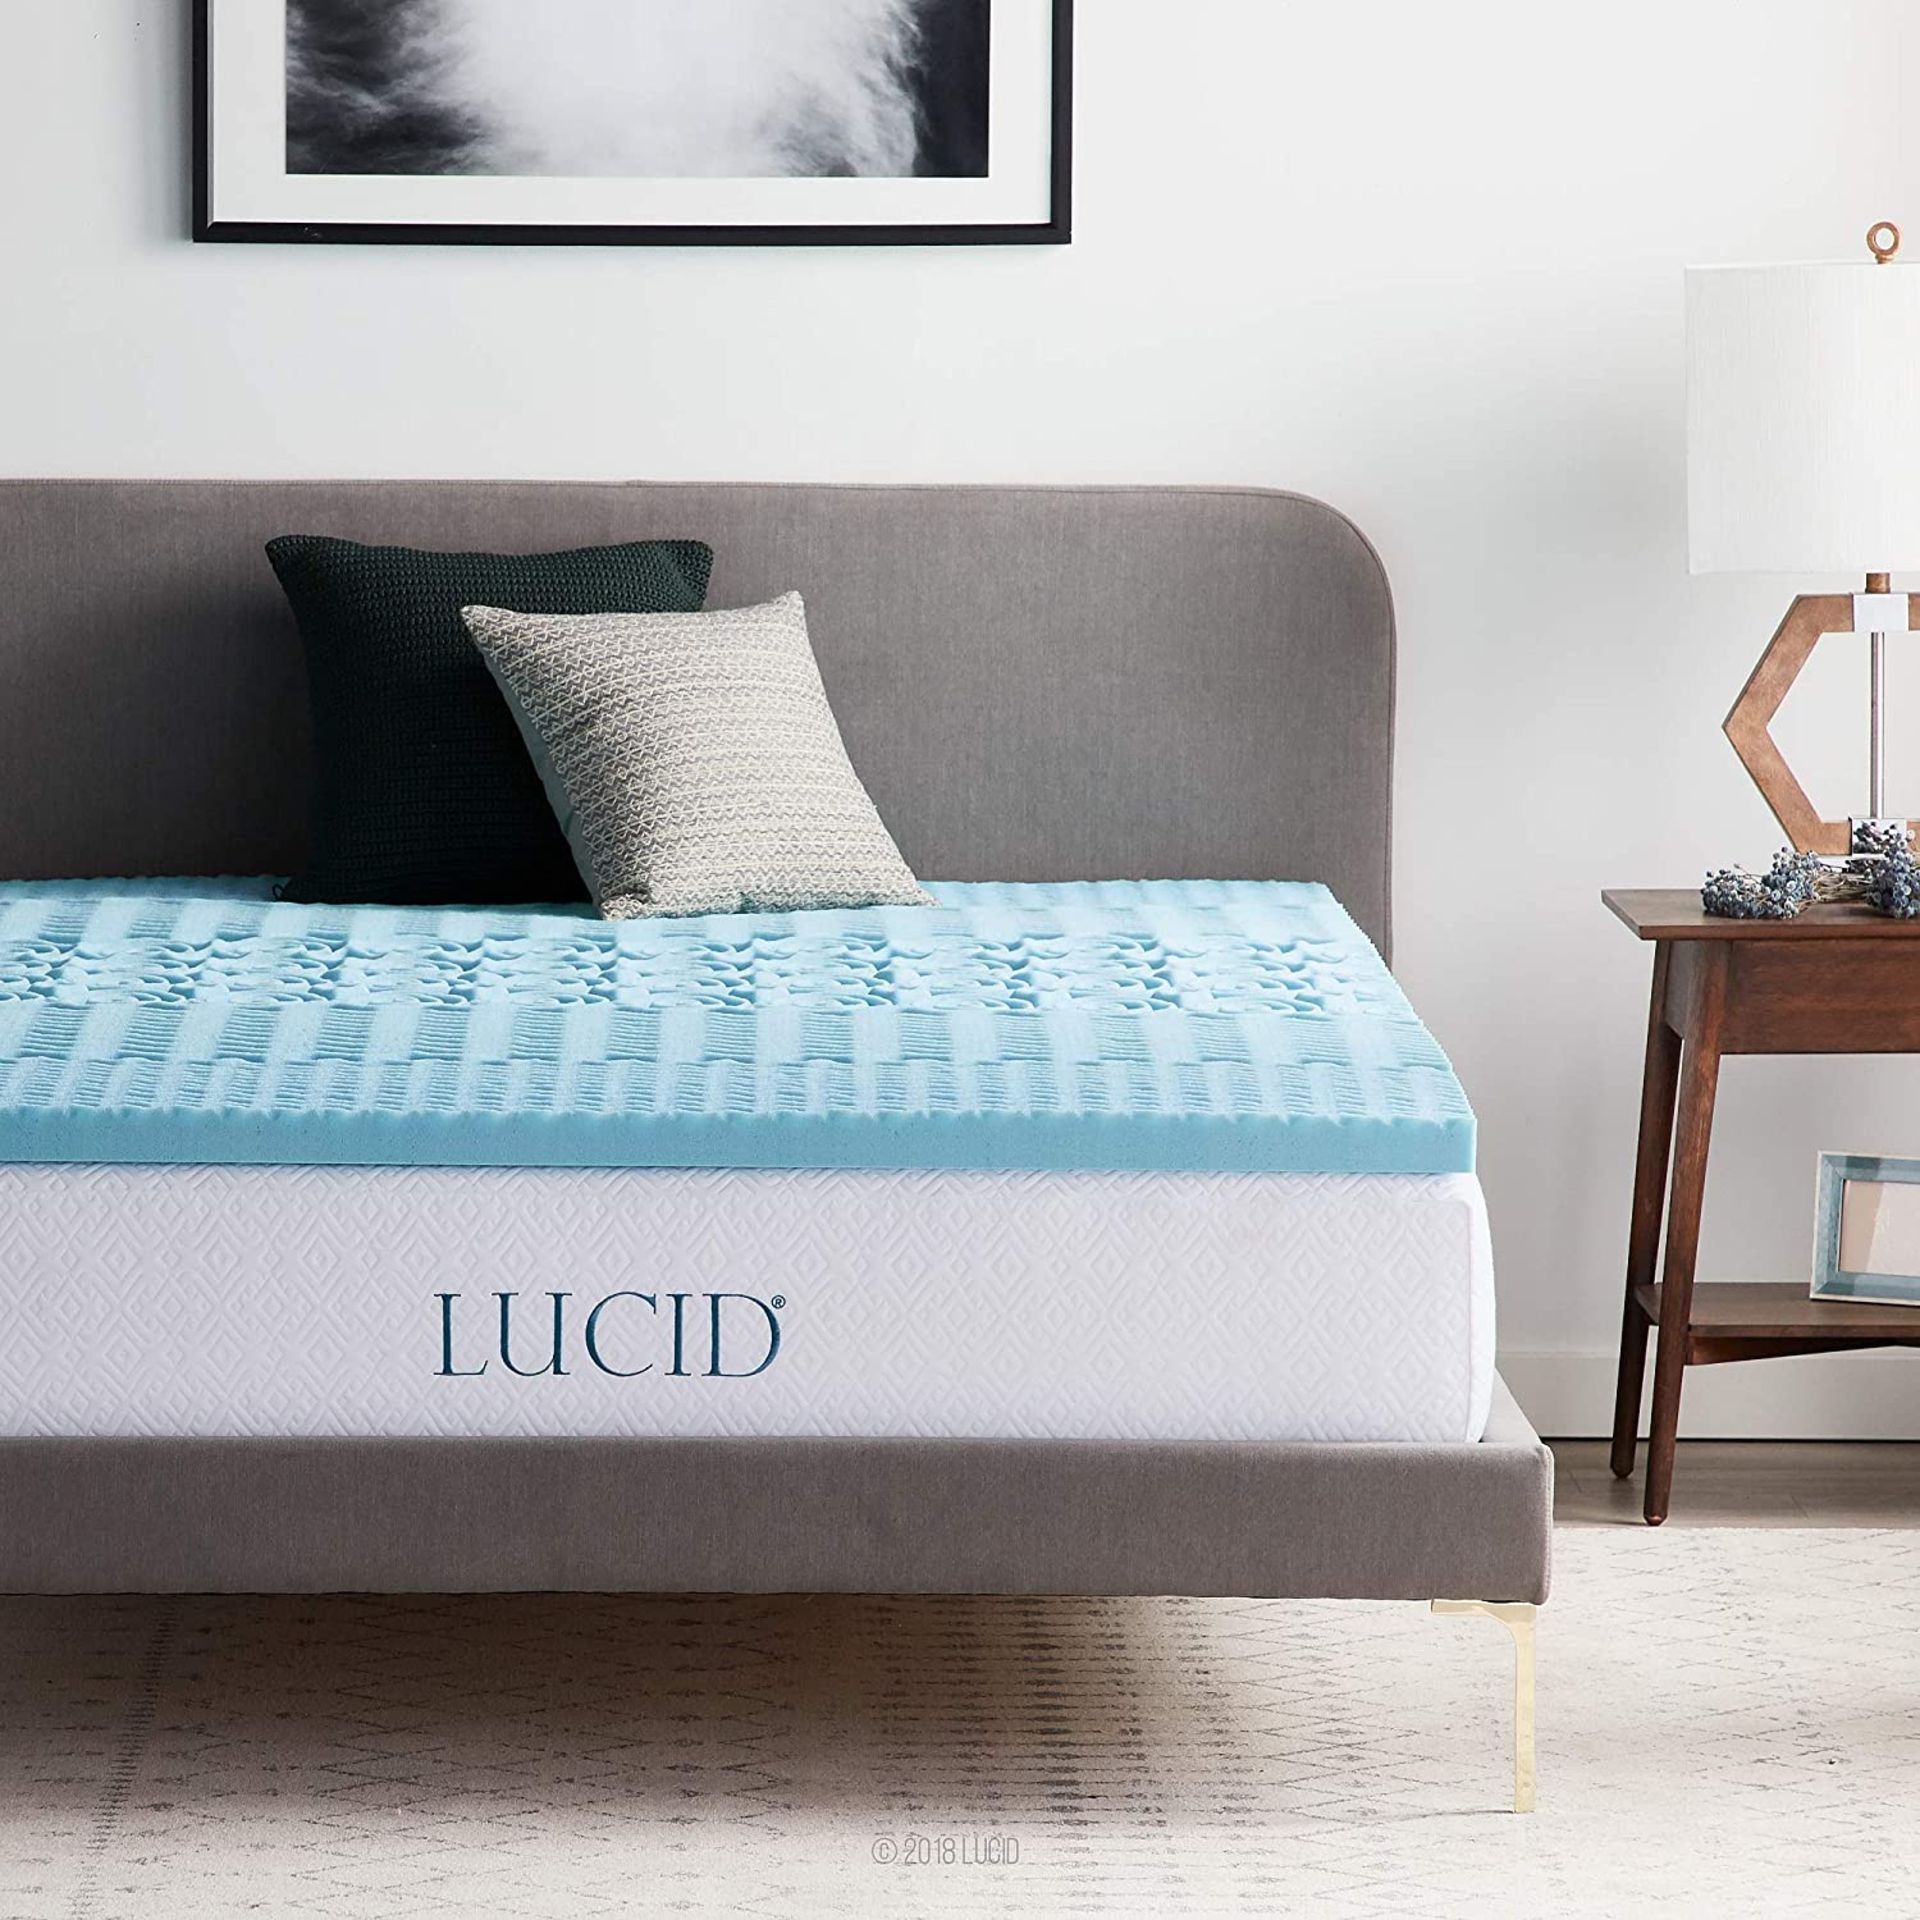 LUCID ZONED GEL MATTRESS TOPPER RRP £42Condition ReportAppraisal Available on Request - All Items